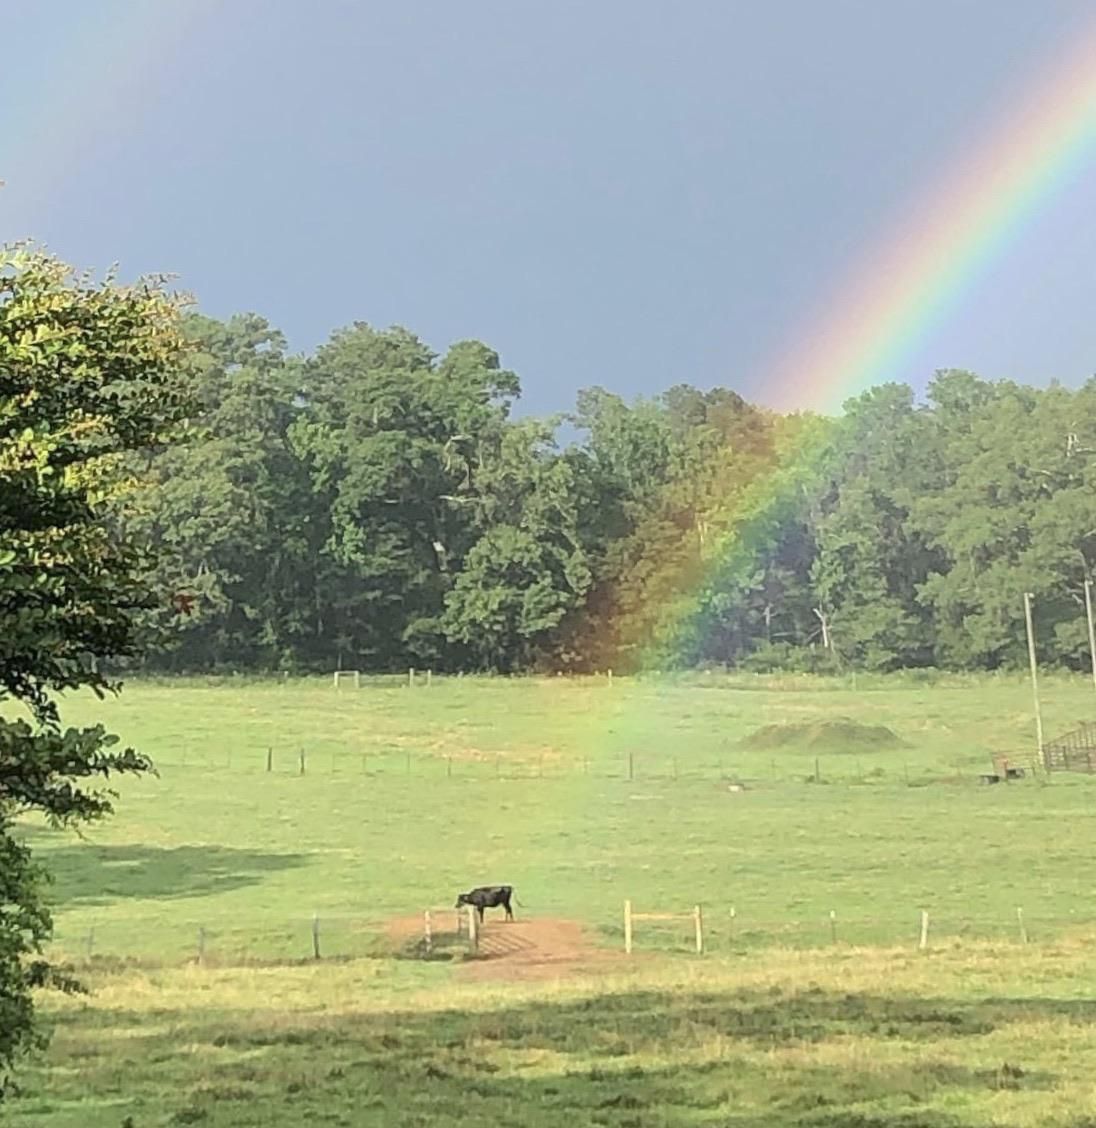 The pot of gold looks like a cow.